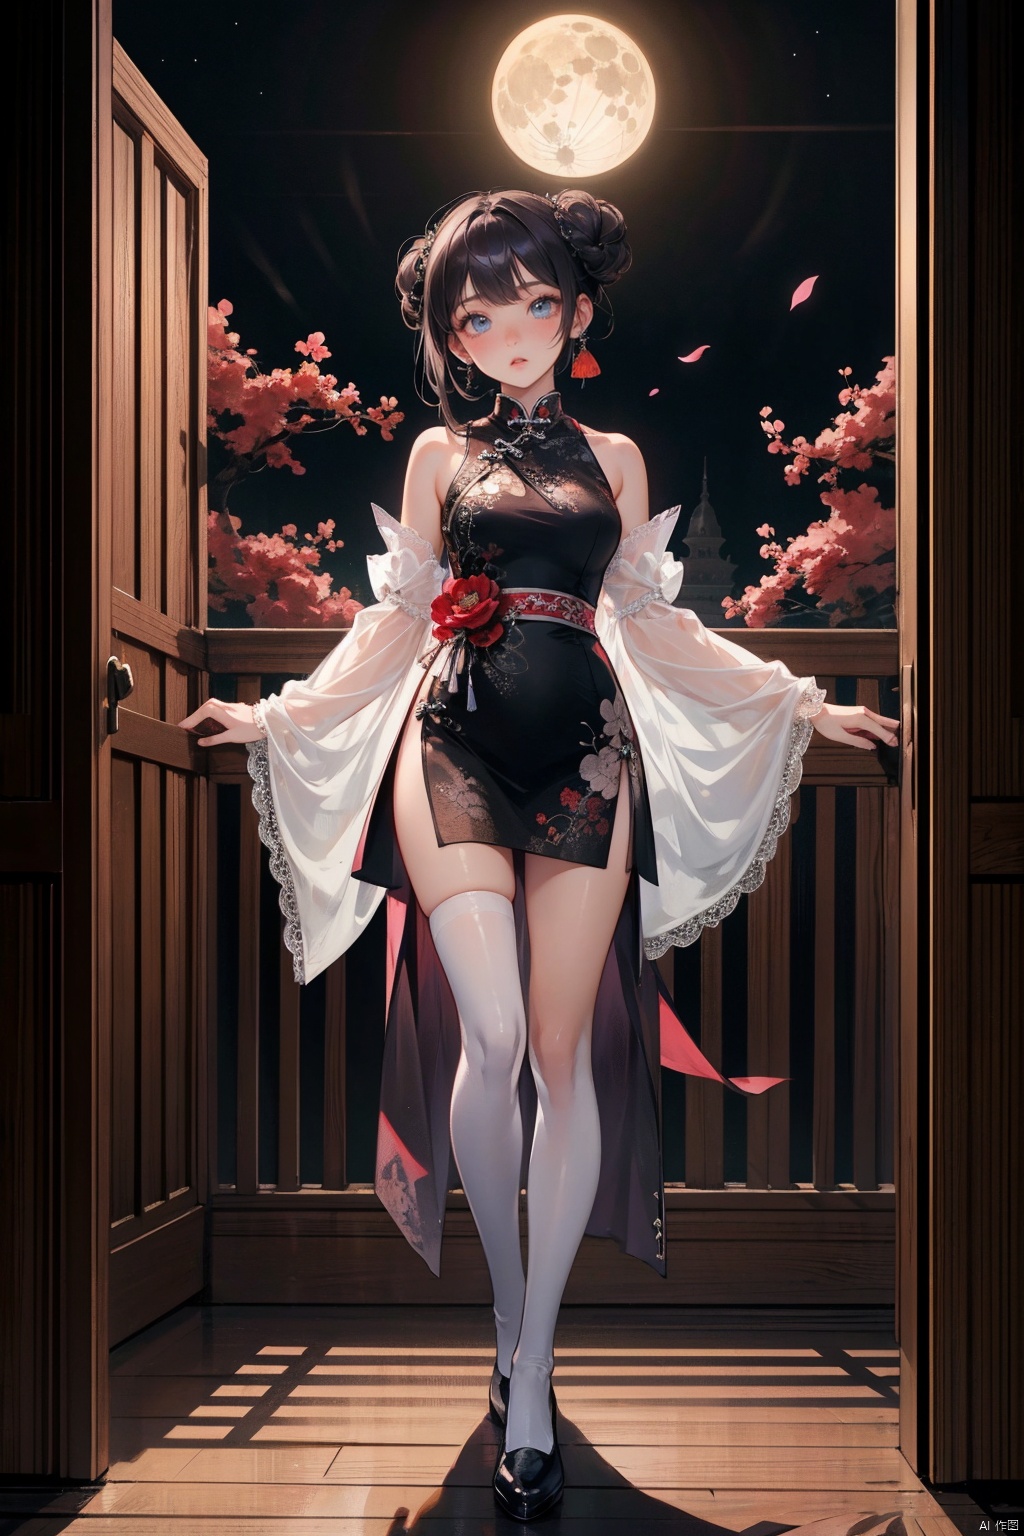 Ancient Chinese Courtyard at Night: 1.7), 1 girl, standing, qiang gui (Chinese zombie) attire, short cheongsam-inspired skirt, white thigh-highs, Qing Dynasty-styled dress with Mandarin collar, brocade embroidery, torn hemline revealing thigh-highs, bound feet in traditional lotus shoes, blackened fingernails, stylized white face paint, exaggerated theatrical makeup, coal-rimmed eyes, dark purple lipstick, jet-black hair in tight bun, elaborate hairpins, dangling plum blossom earrings, vermilion silk sash, trailing tattered sleeves, classic Chinese僵尸posture, stiff gait, traditional headdress with bat and peony motifs, jade pendant, moon glow, paper funeral money scattered, incense smoke, ancient architecture, elongated fingernails, glazed ceramic pot shattered nearby, ominous shadows, ((poakl))